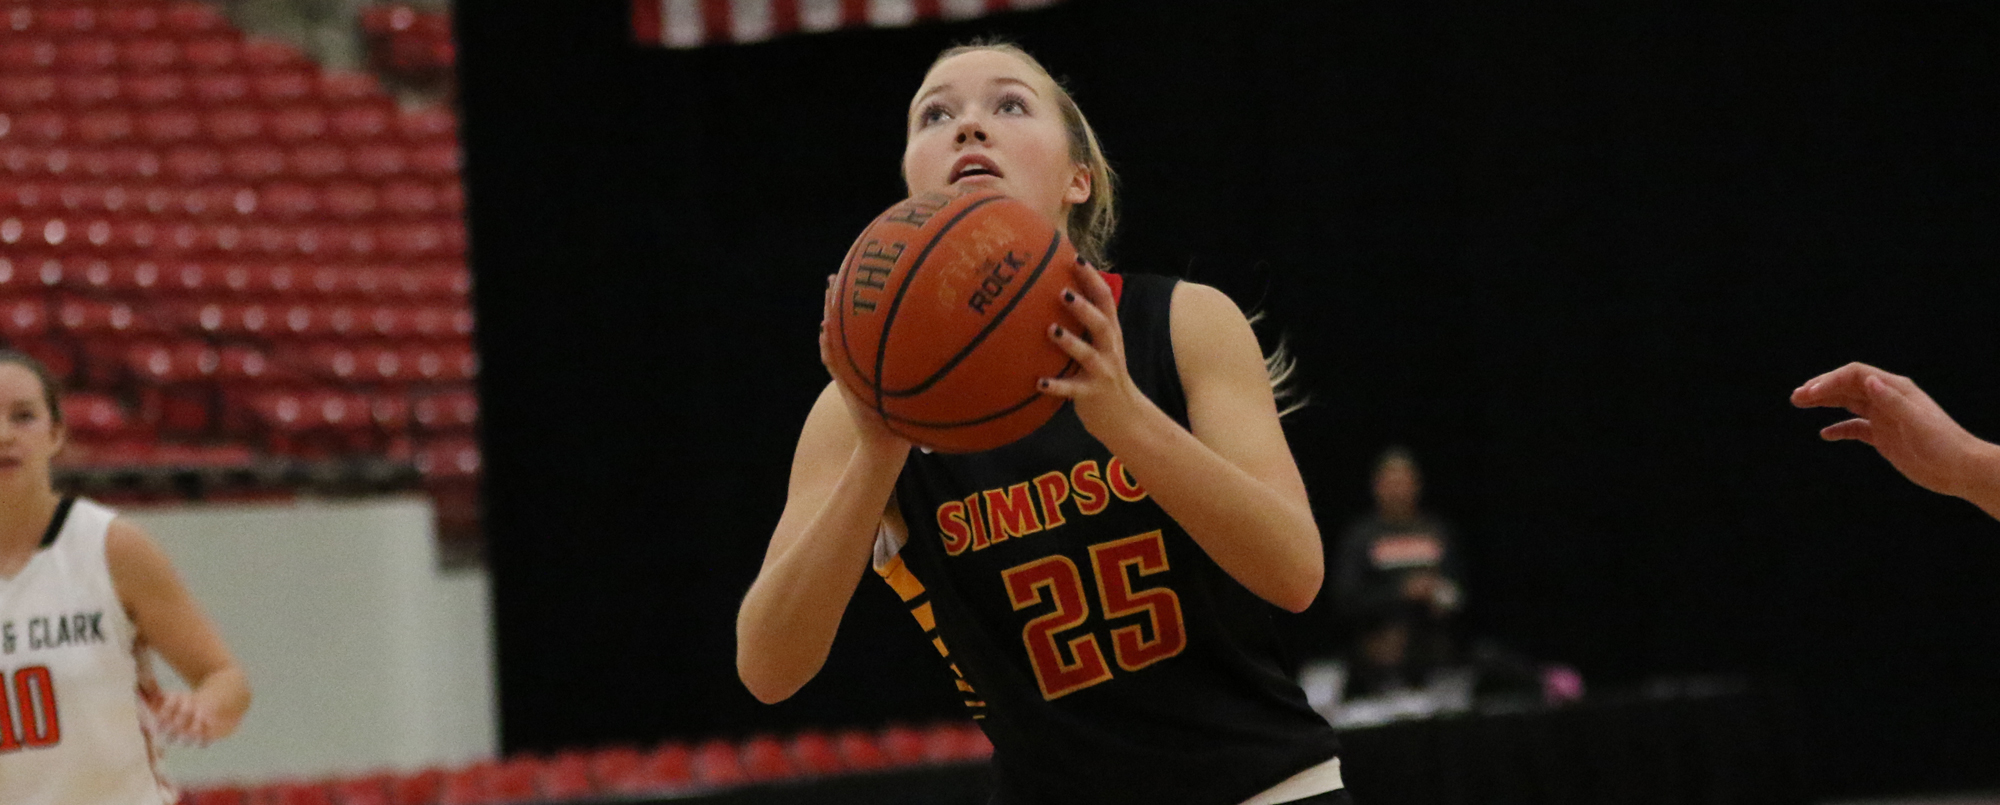 Allyson Simpson scored eight crucial points in Simpson's 58-48 win over Dubuque.